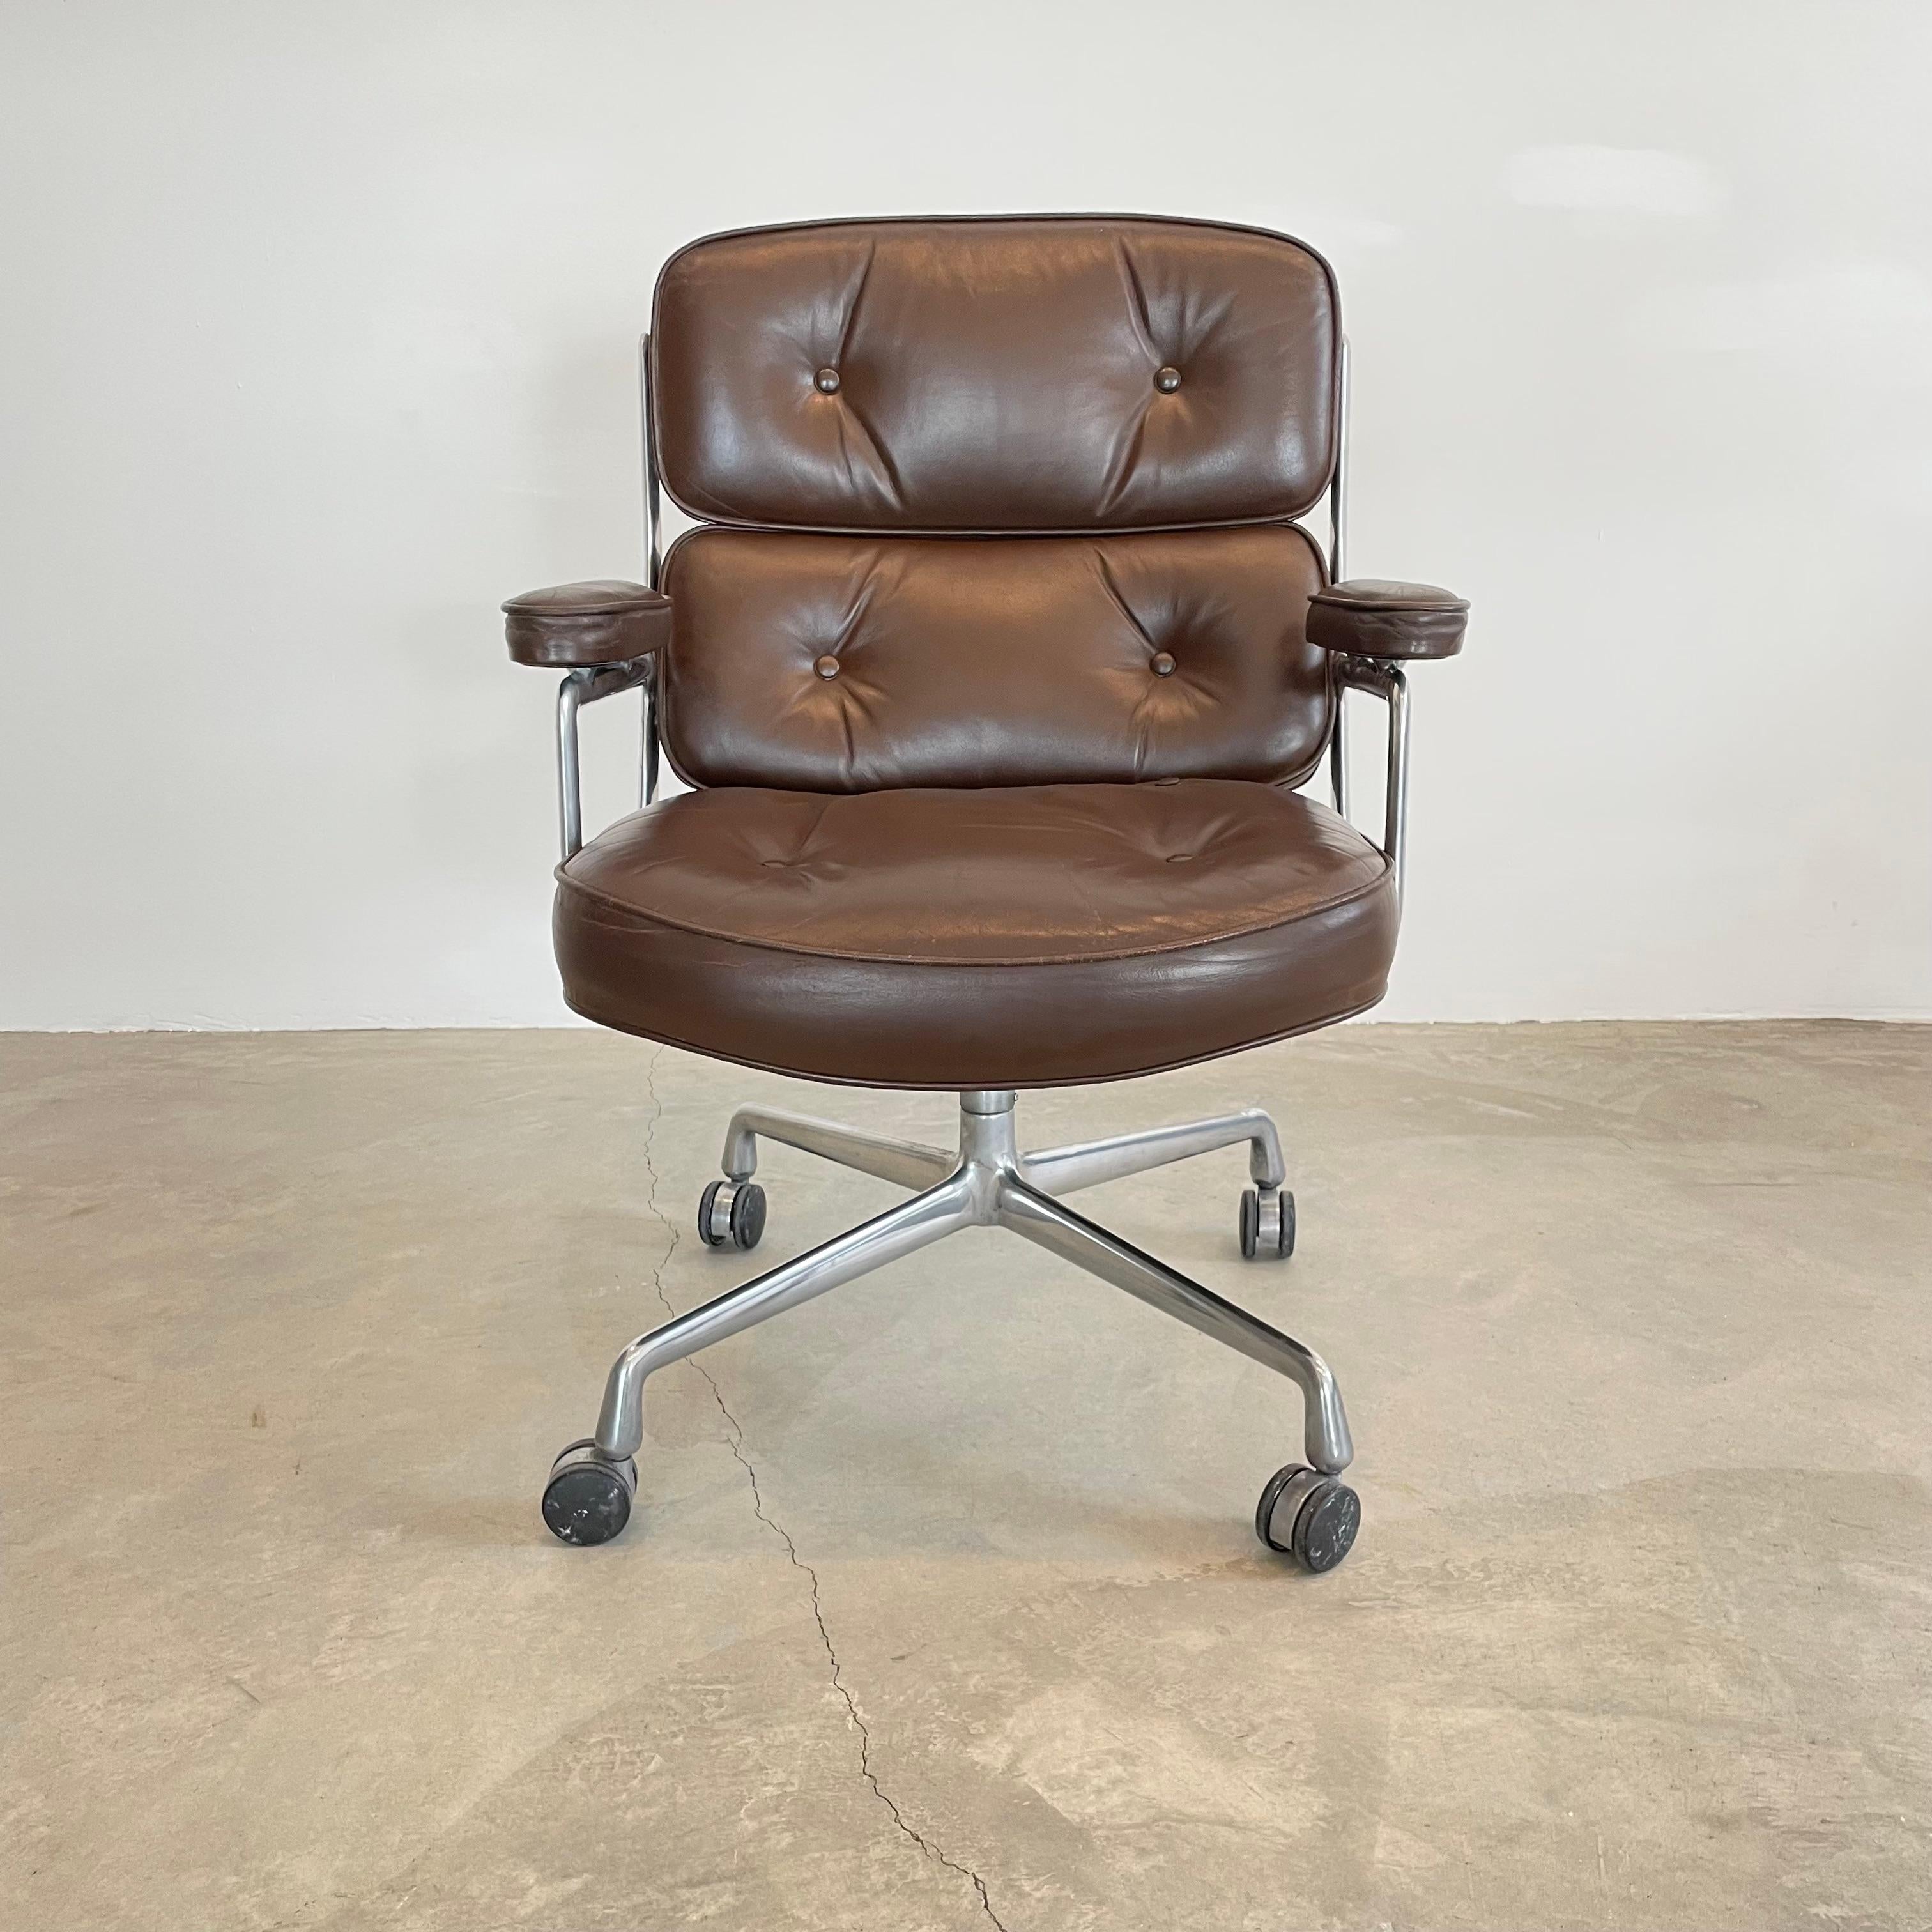 Eames Time Life Chair in Chocolate Leather for Herman Miller, 1978 USA For Sale 13